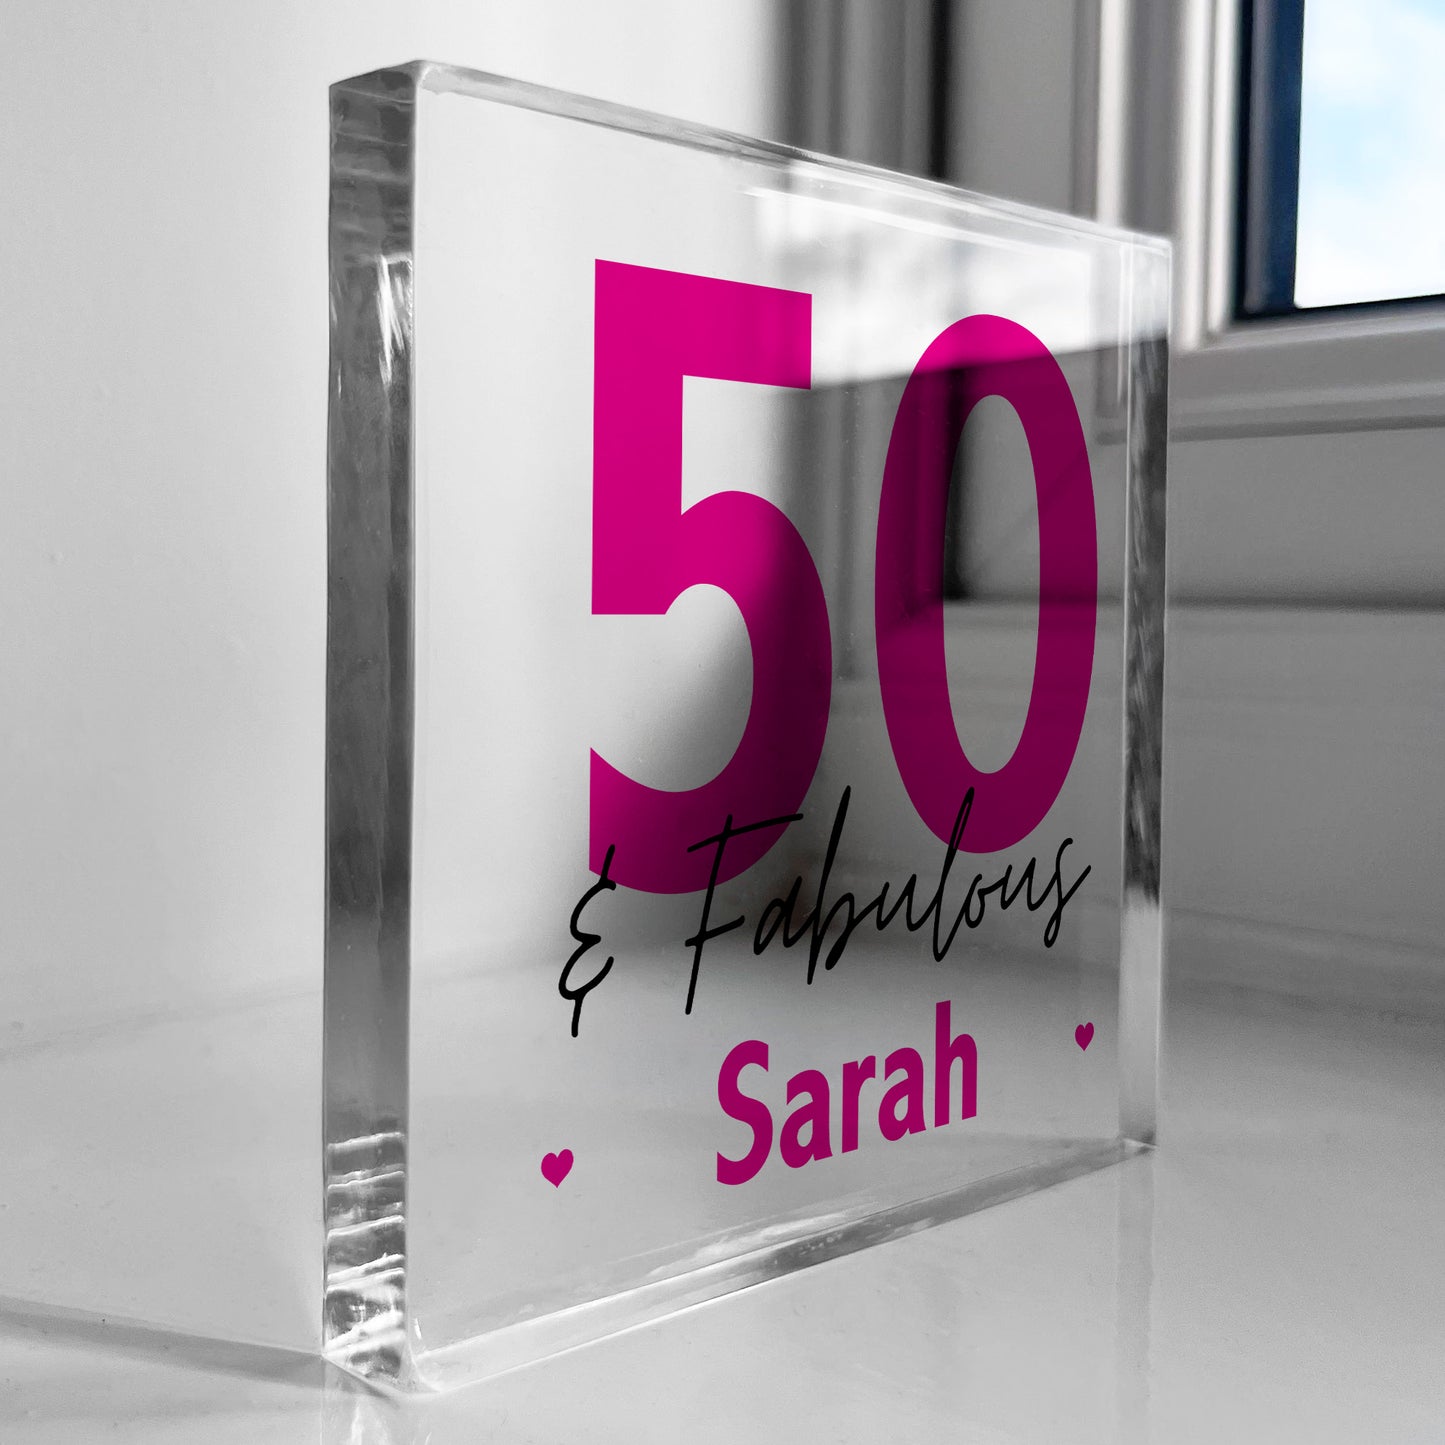 50th Birthday Gift Personalised Acrylic Block 50 And Fabulous